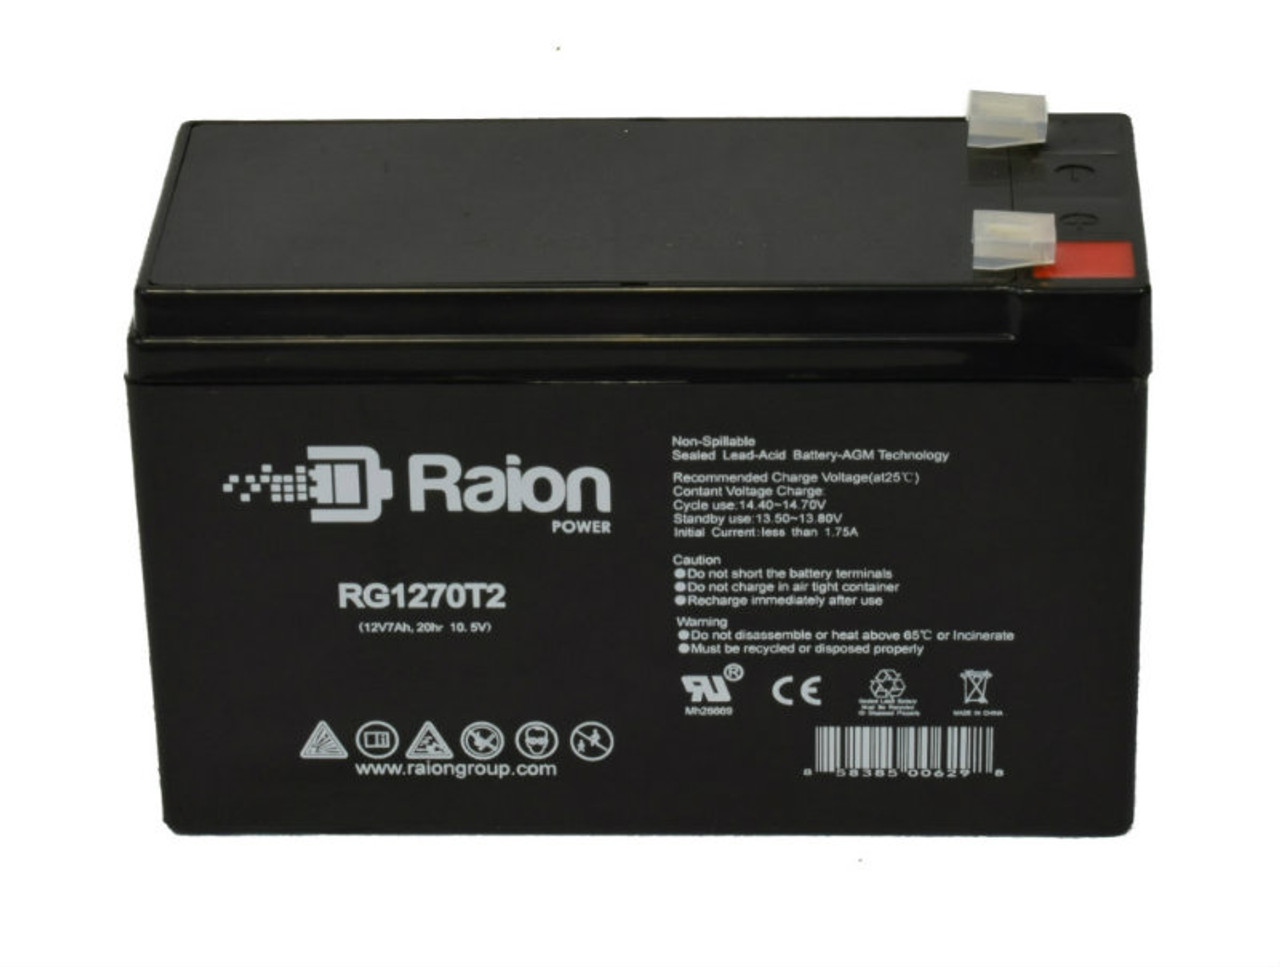 Raion Power RG1270T1 Replacement Battery for Datamars Solarguard 155 Electric Fence Charger